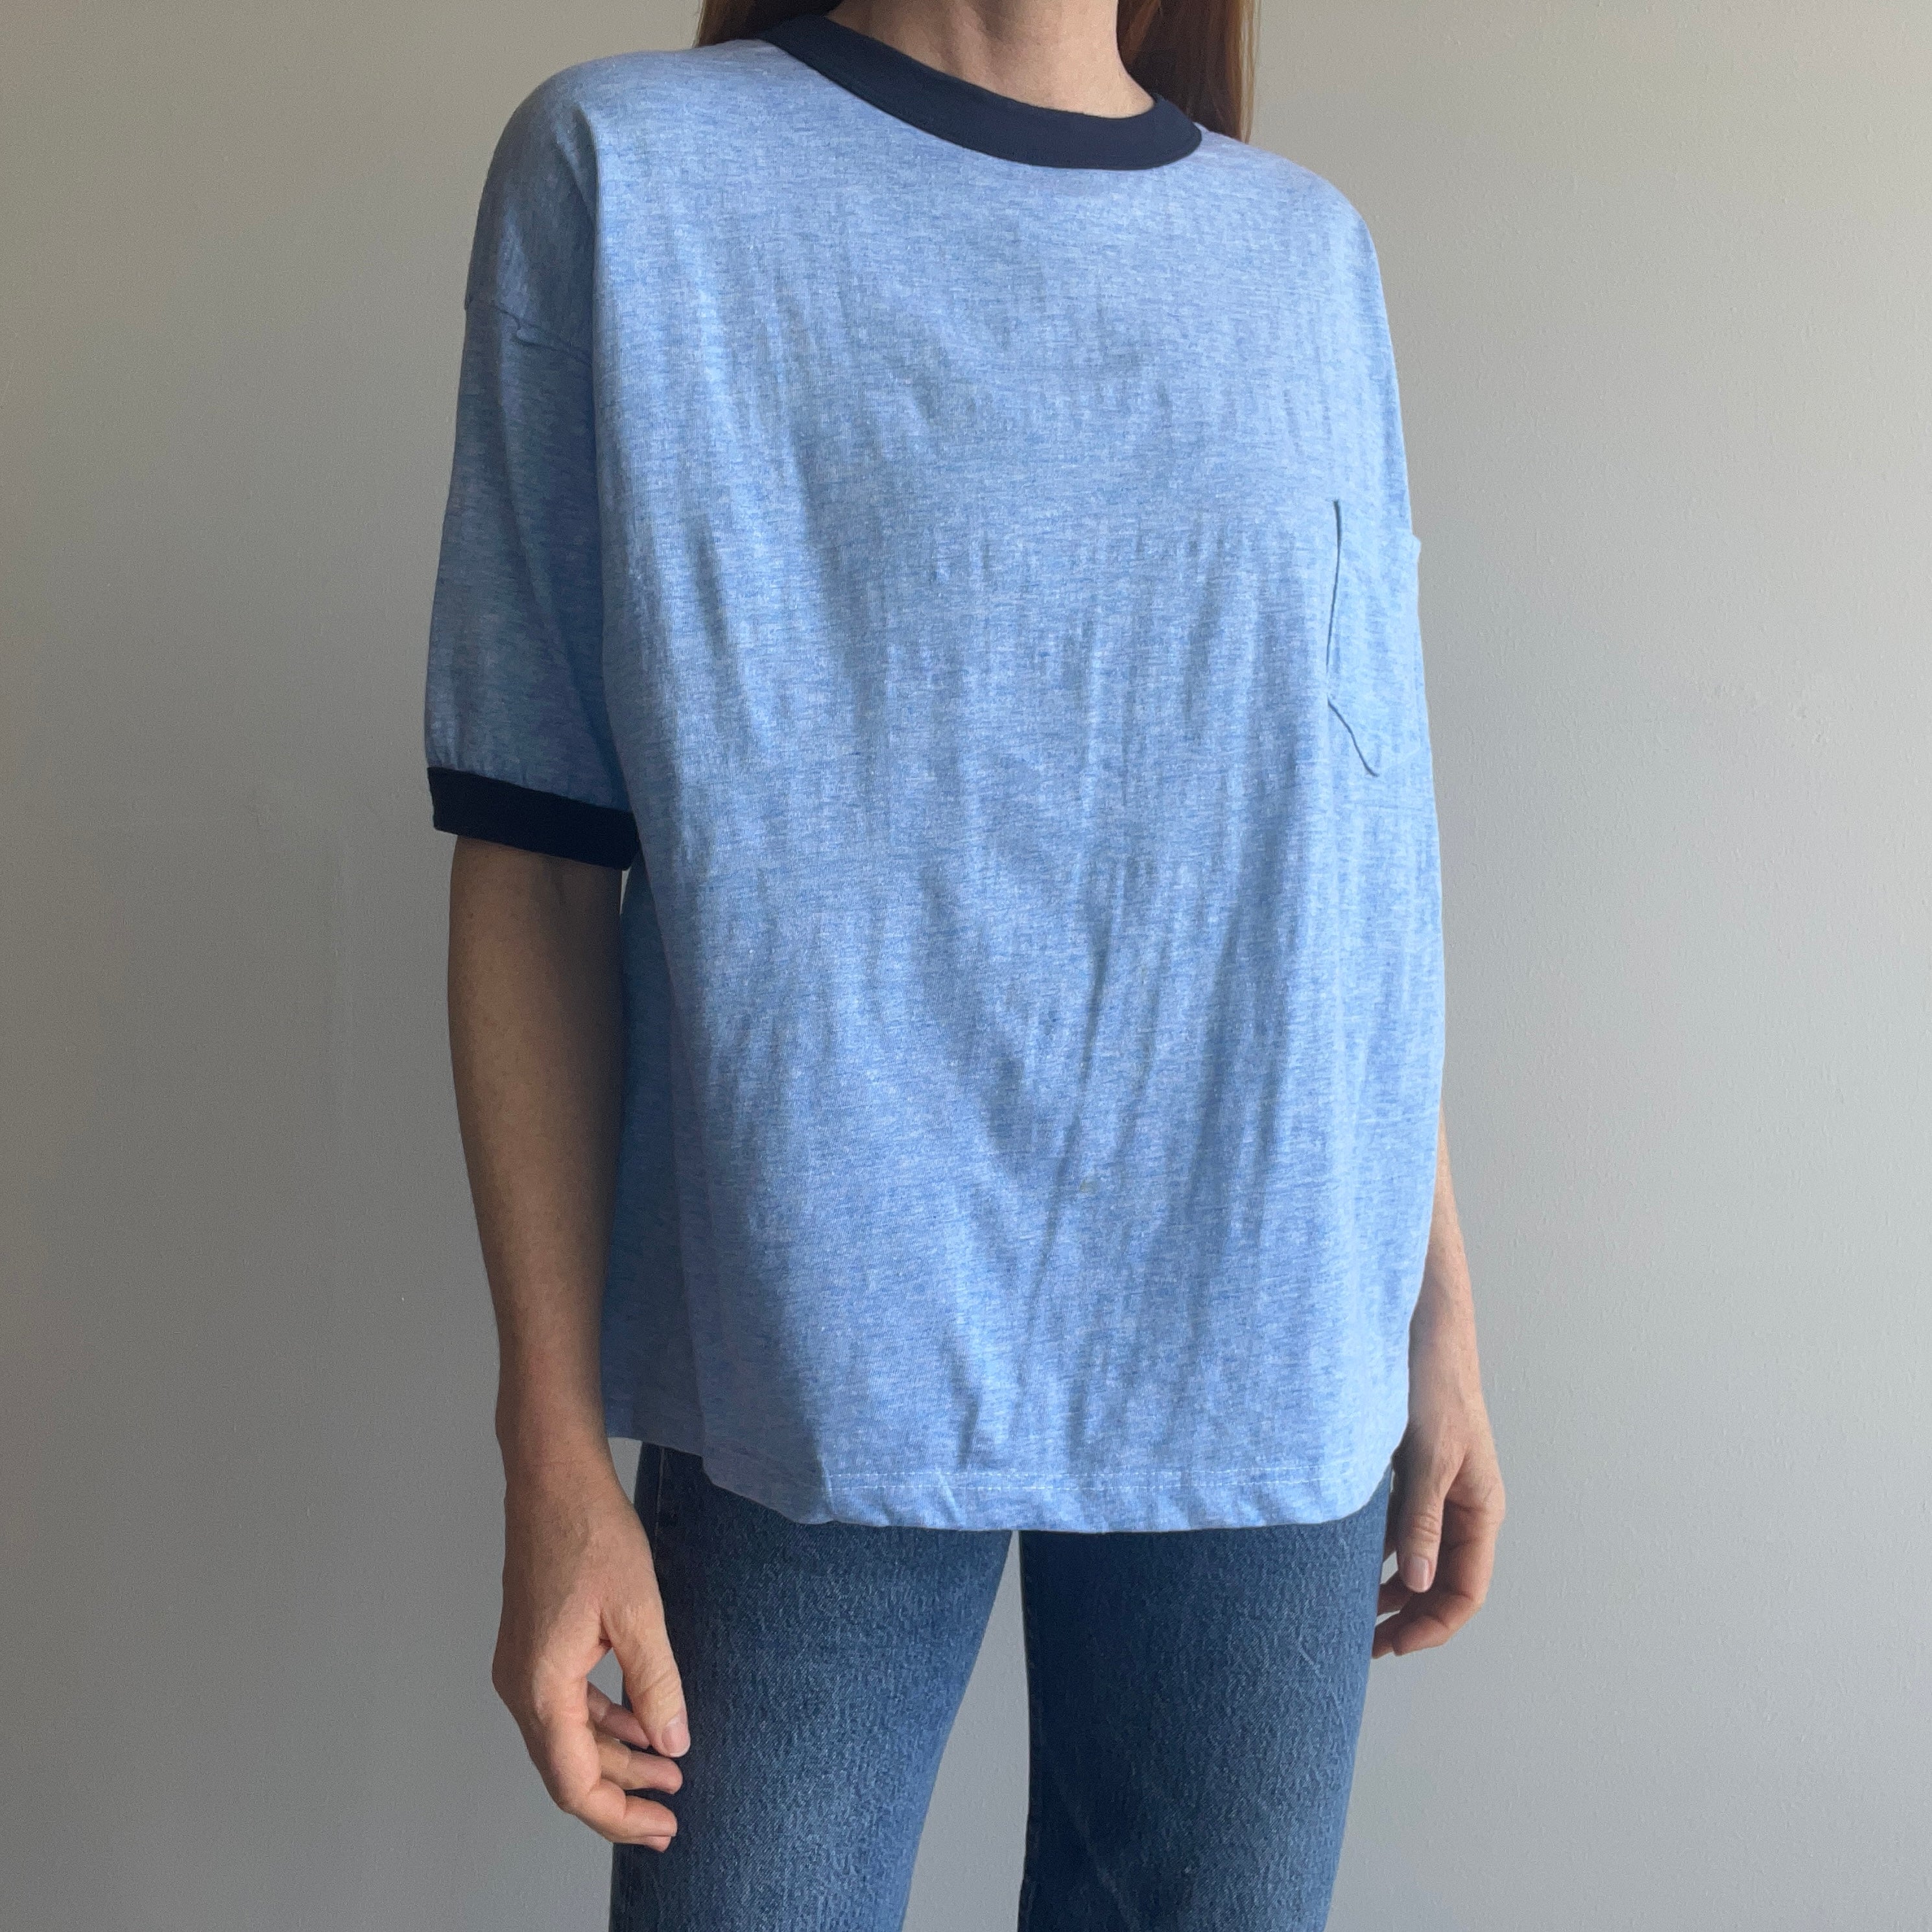 1970/80s Slouchy Larger Heather Blue Ring Tee with a Lovely Pocket (Wrinkled)